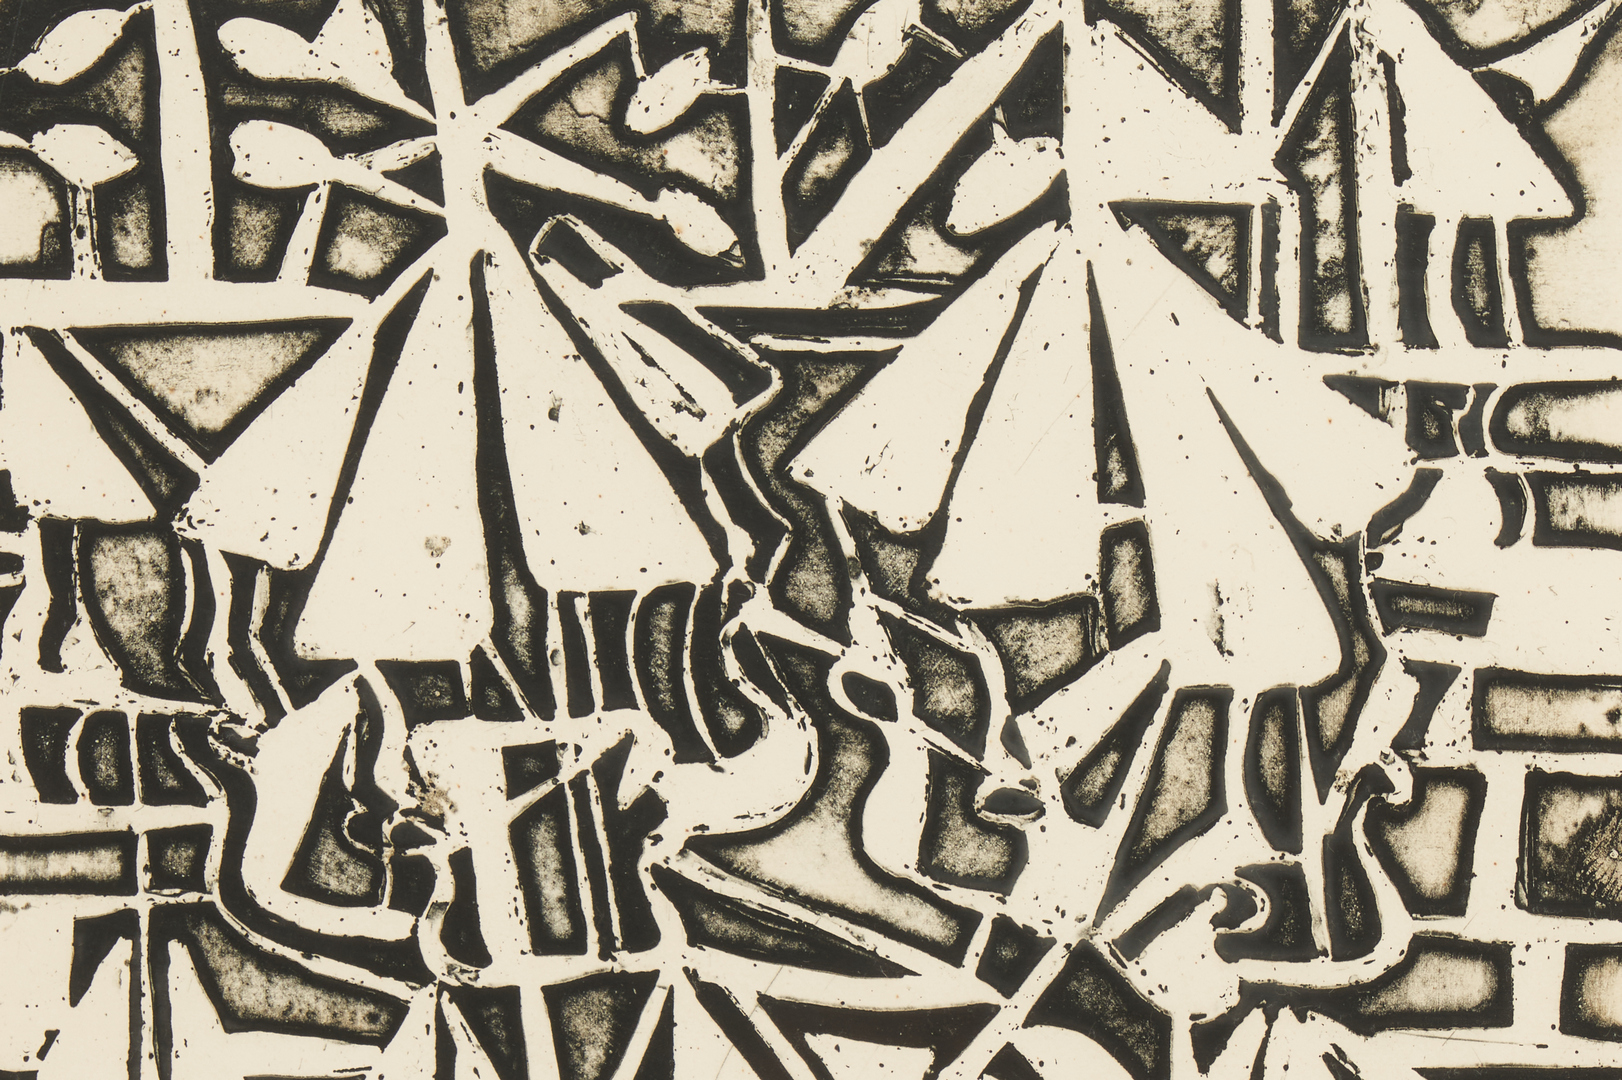 Lot 218: 4 Nahum Tschacbasov Cubo-Surrealistic Abstract Etchings